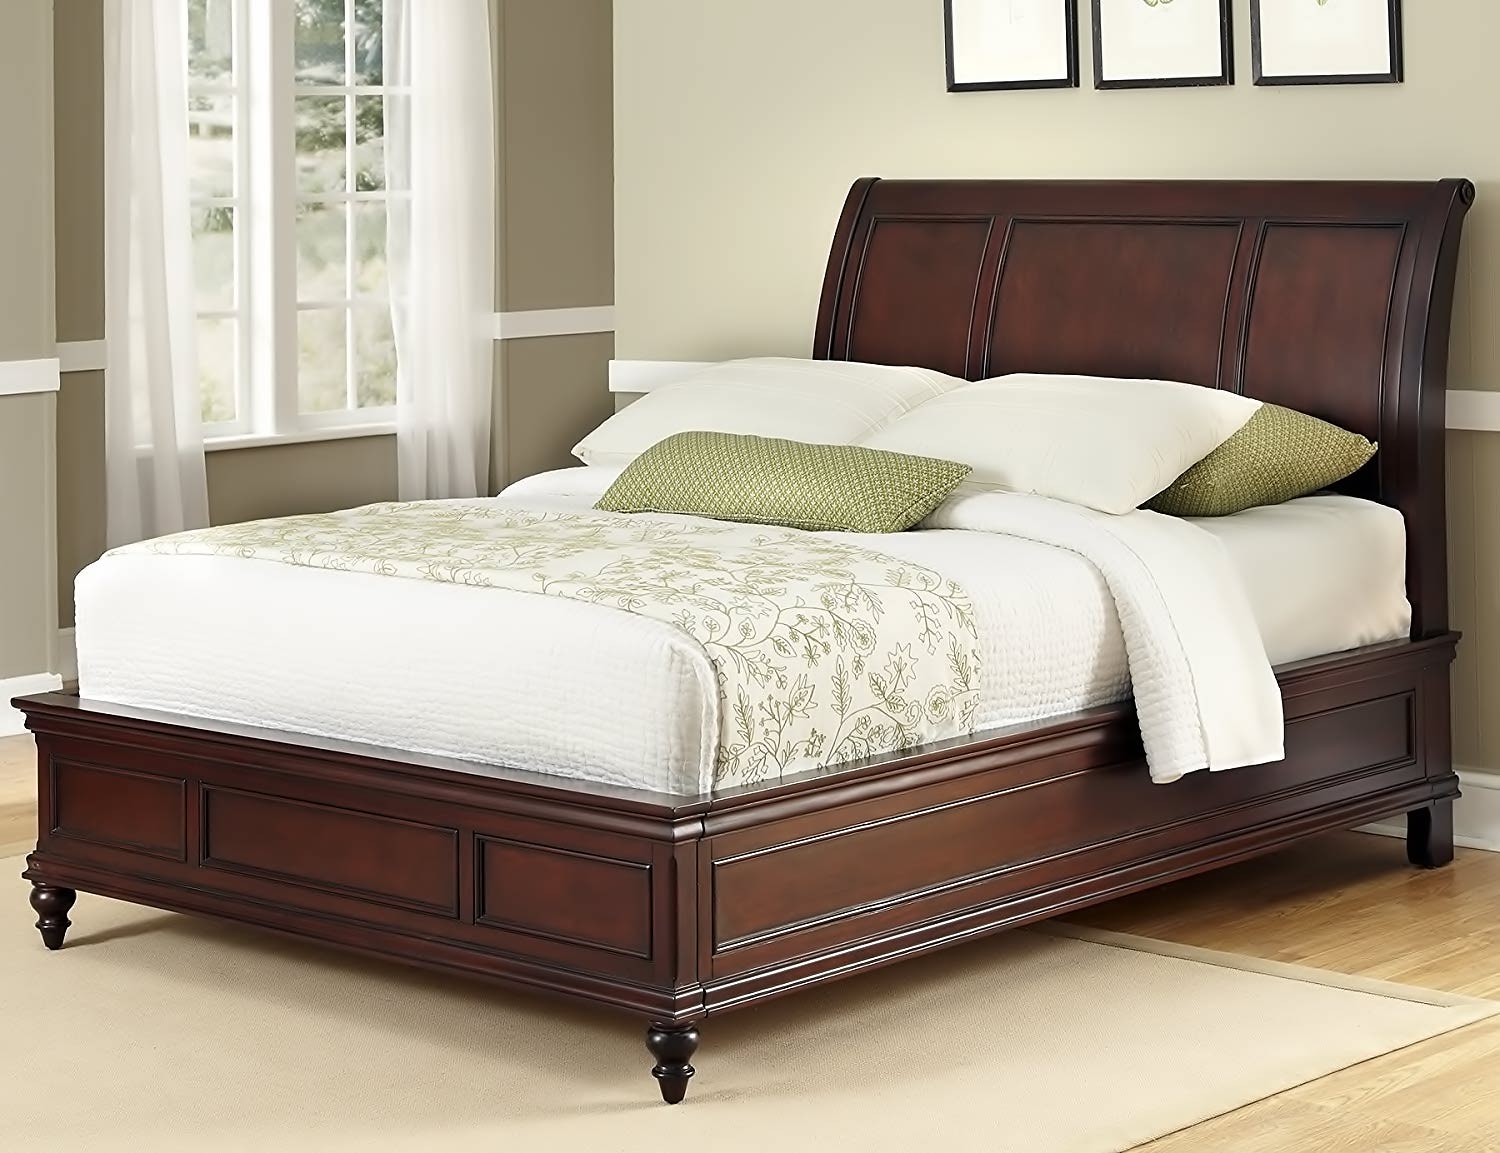 Home Styles Lafayette King Sleigh Bed